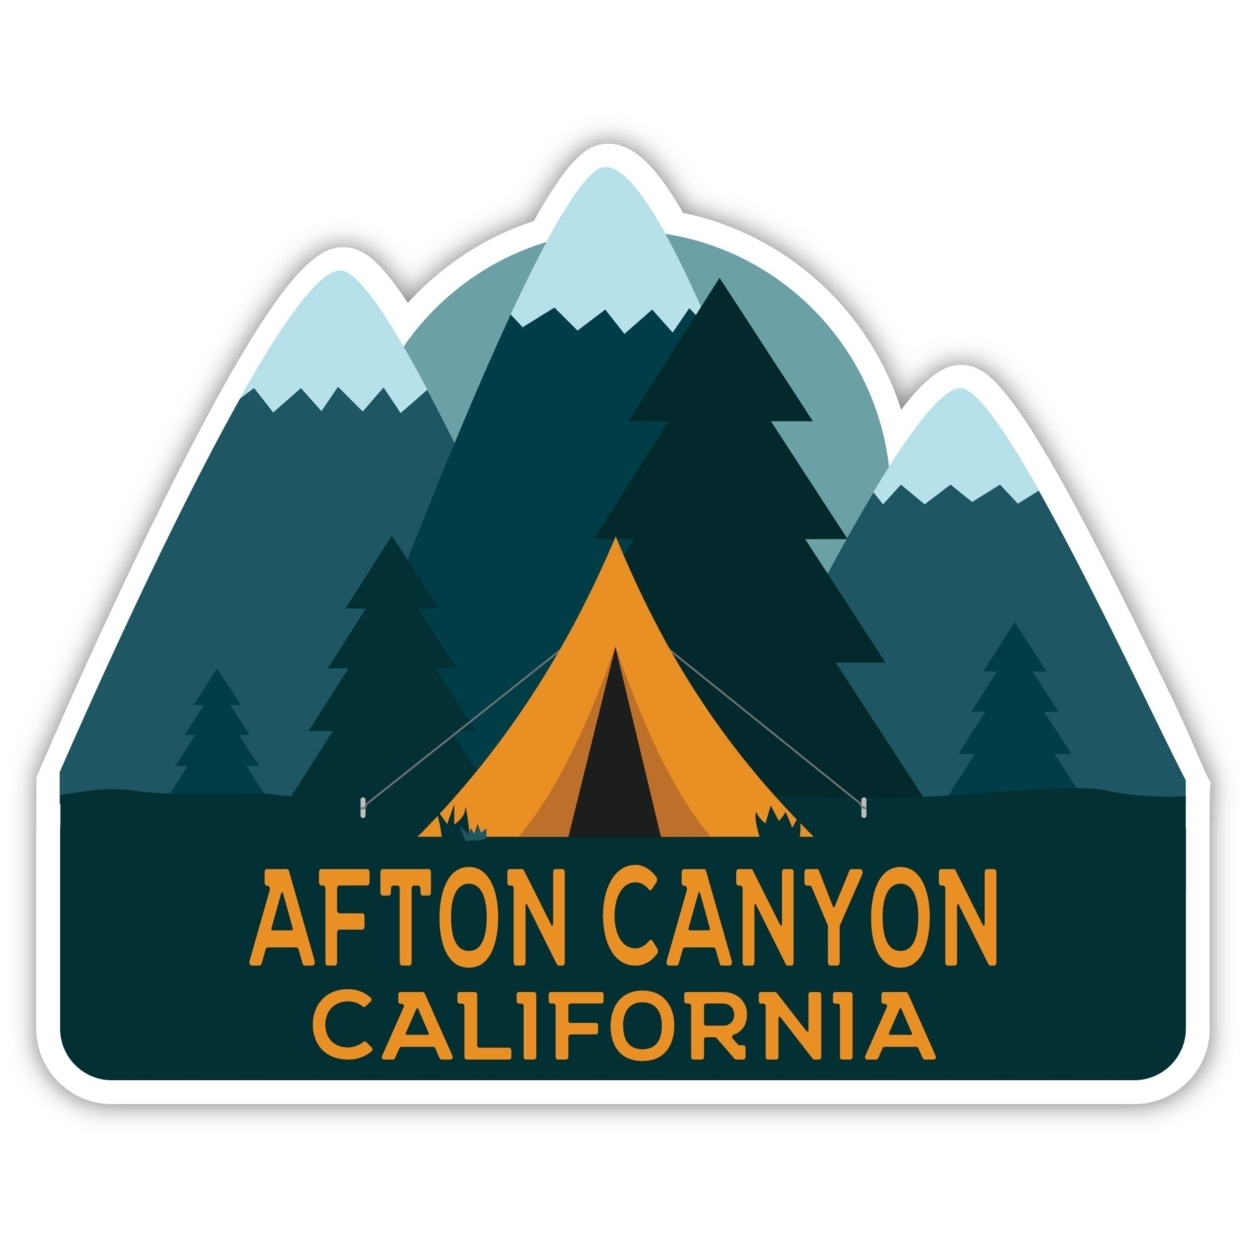 Afton Canyon California Souvenir Decorative Stickers (Choose Theme And Size) - 4-Pack, 10-Inch, Tent